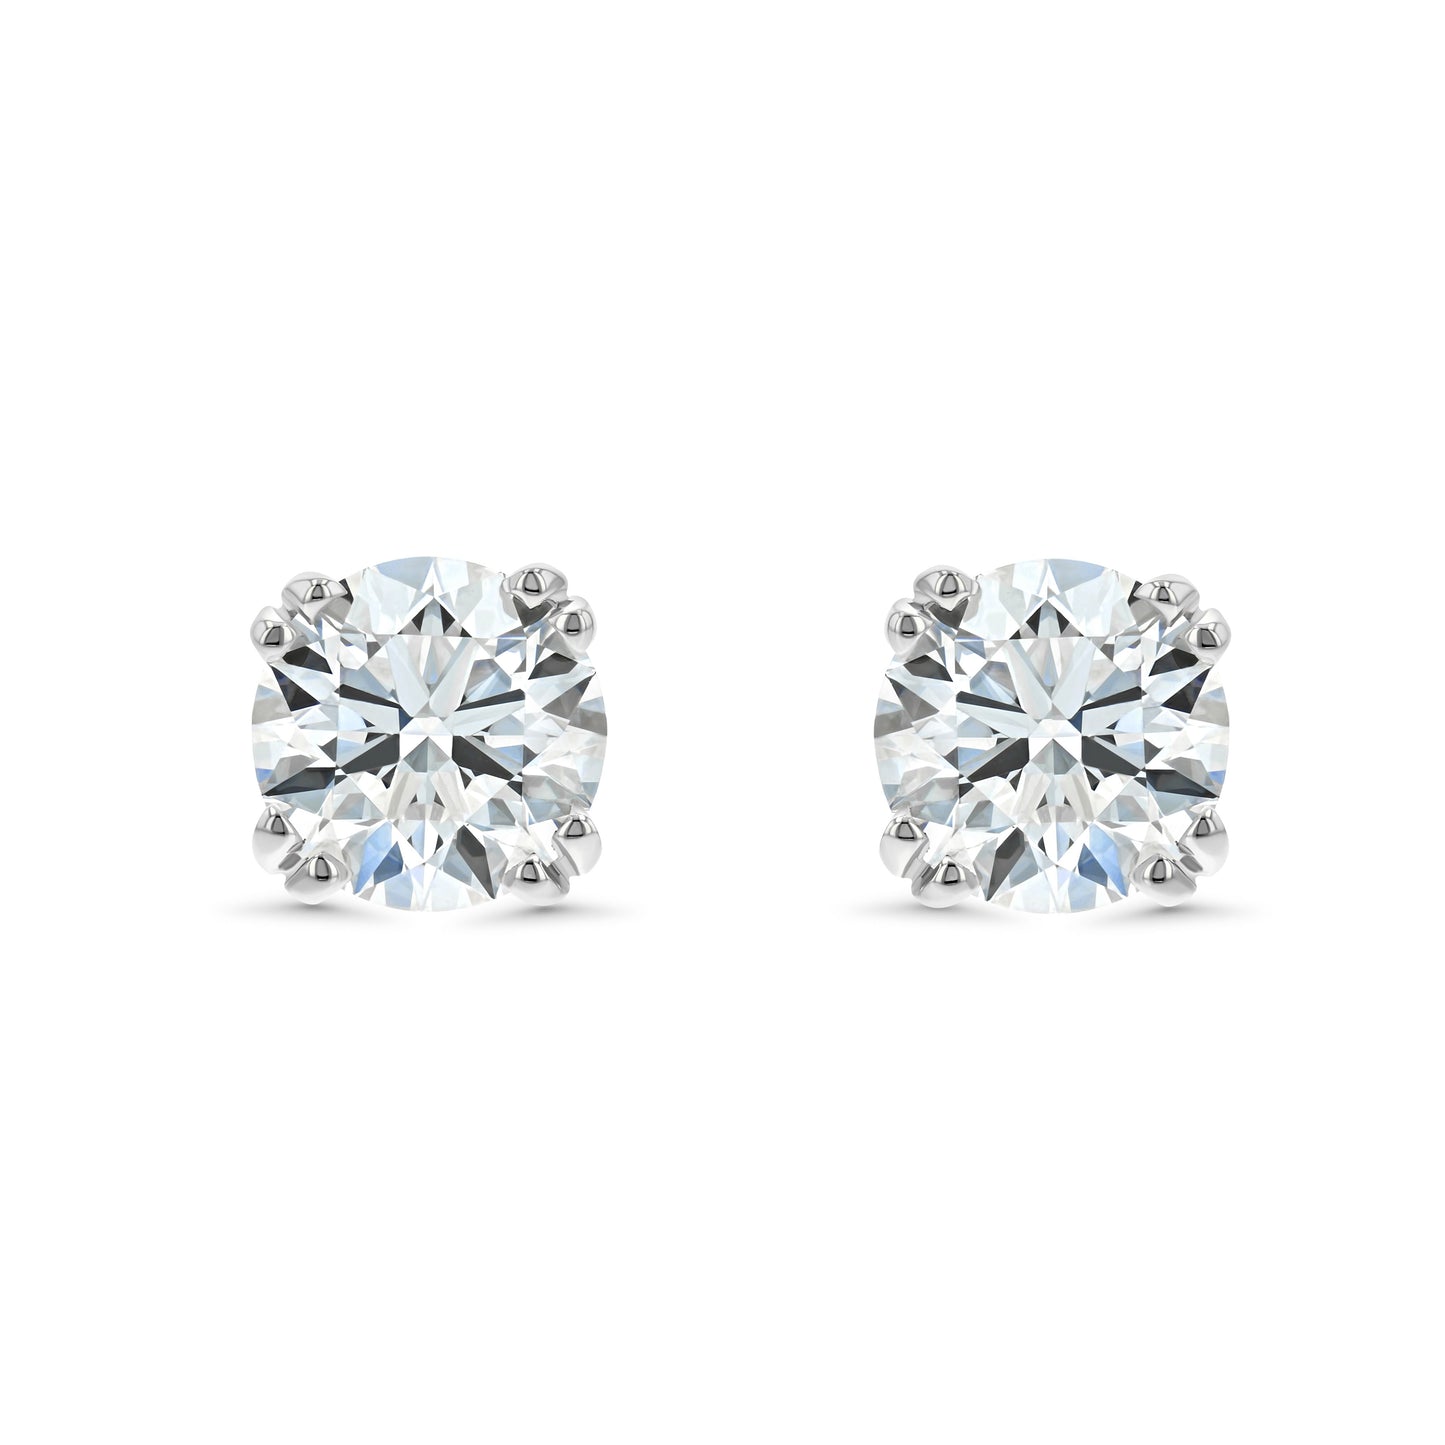 14k White Gold Double Prong Round Diamond Stud Earrings 1ctw (5.2mm Ea), H Color, Si3-i1 Clarity